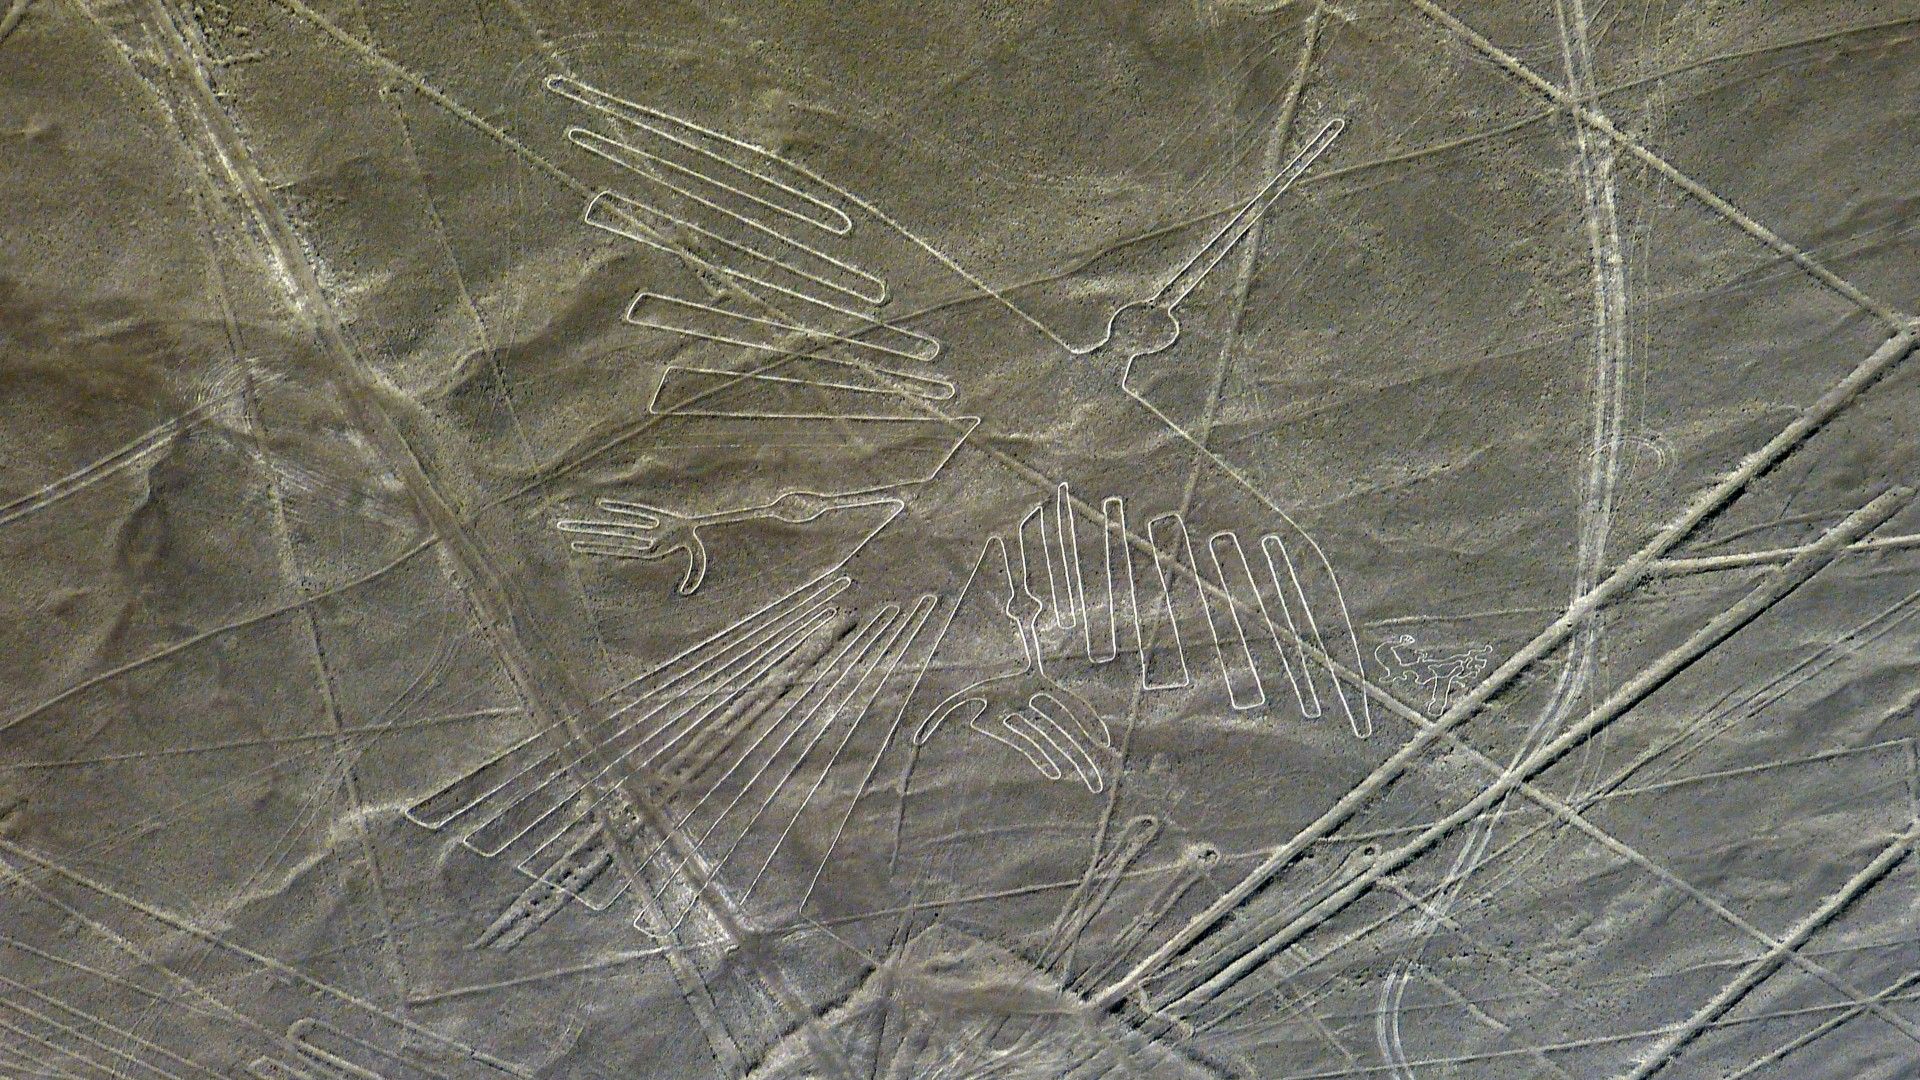 <p>                     There are several geoglyphs inspired by birds, including this condor, which, at 440 feet (134 m) long, is one of the largest works in the desert, according to Nazca Lines Tour.                   </p>